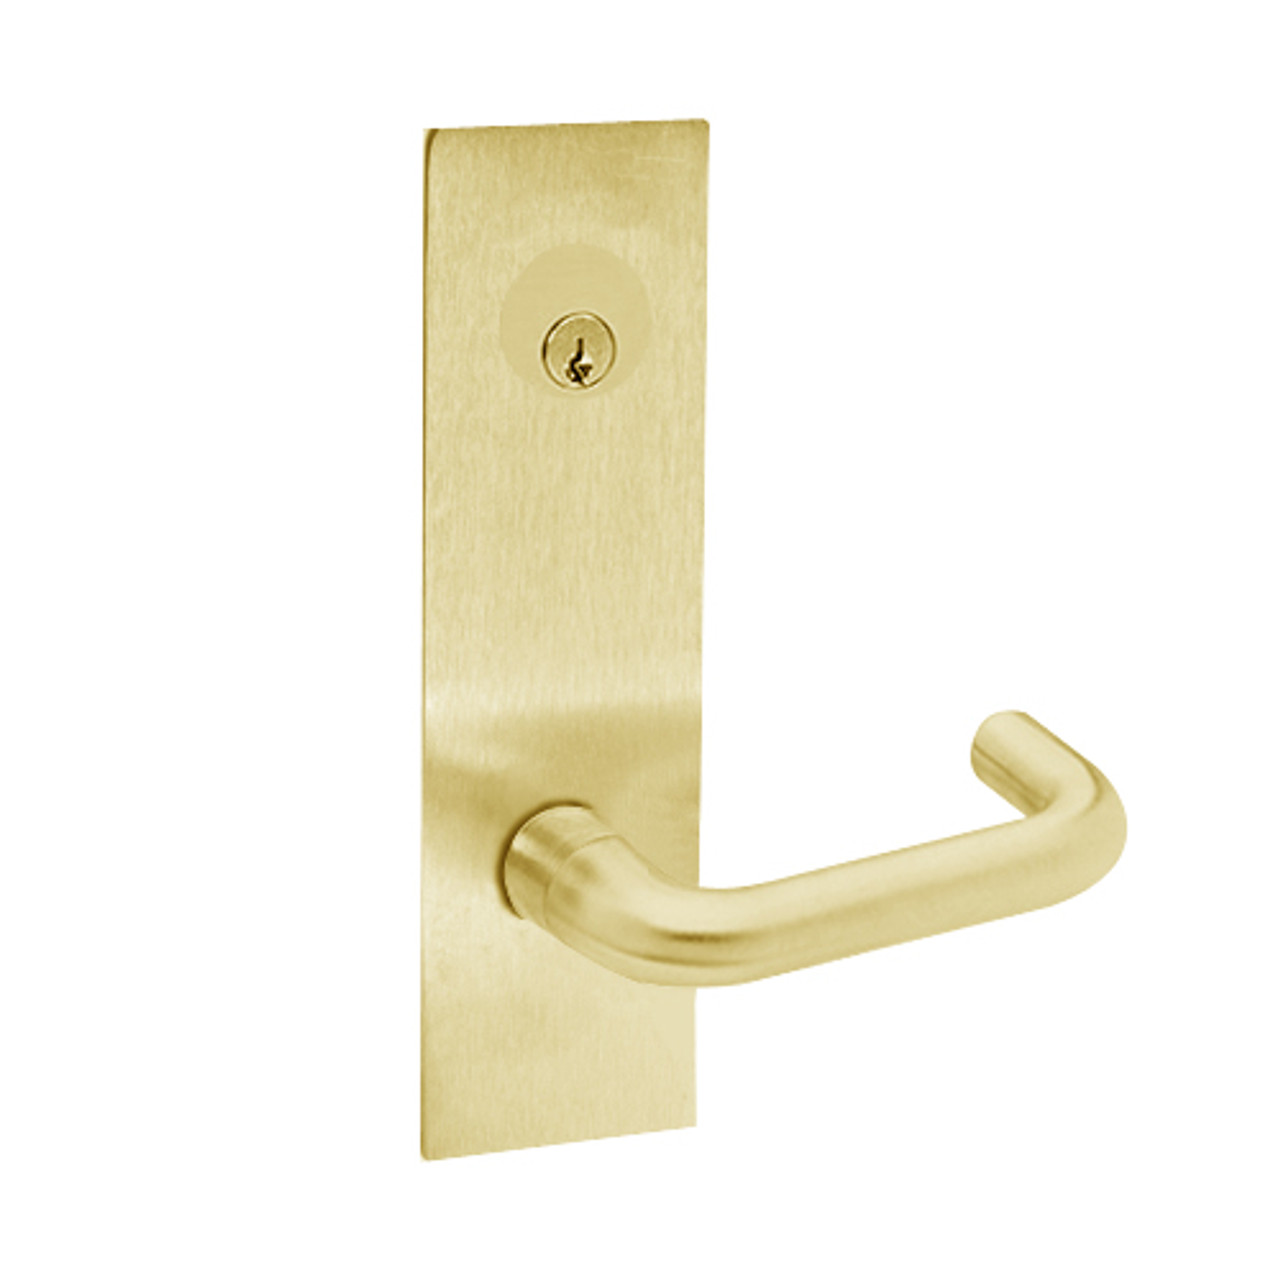 Z7850RCNE SDC Z7800 Selectric Pro Series Locked Outside Sides Failsafe Electric Mortise Lock with Nova Lever in Bright Brass